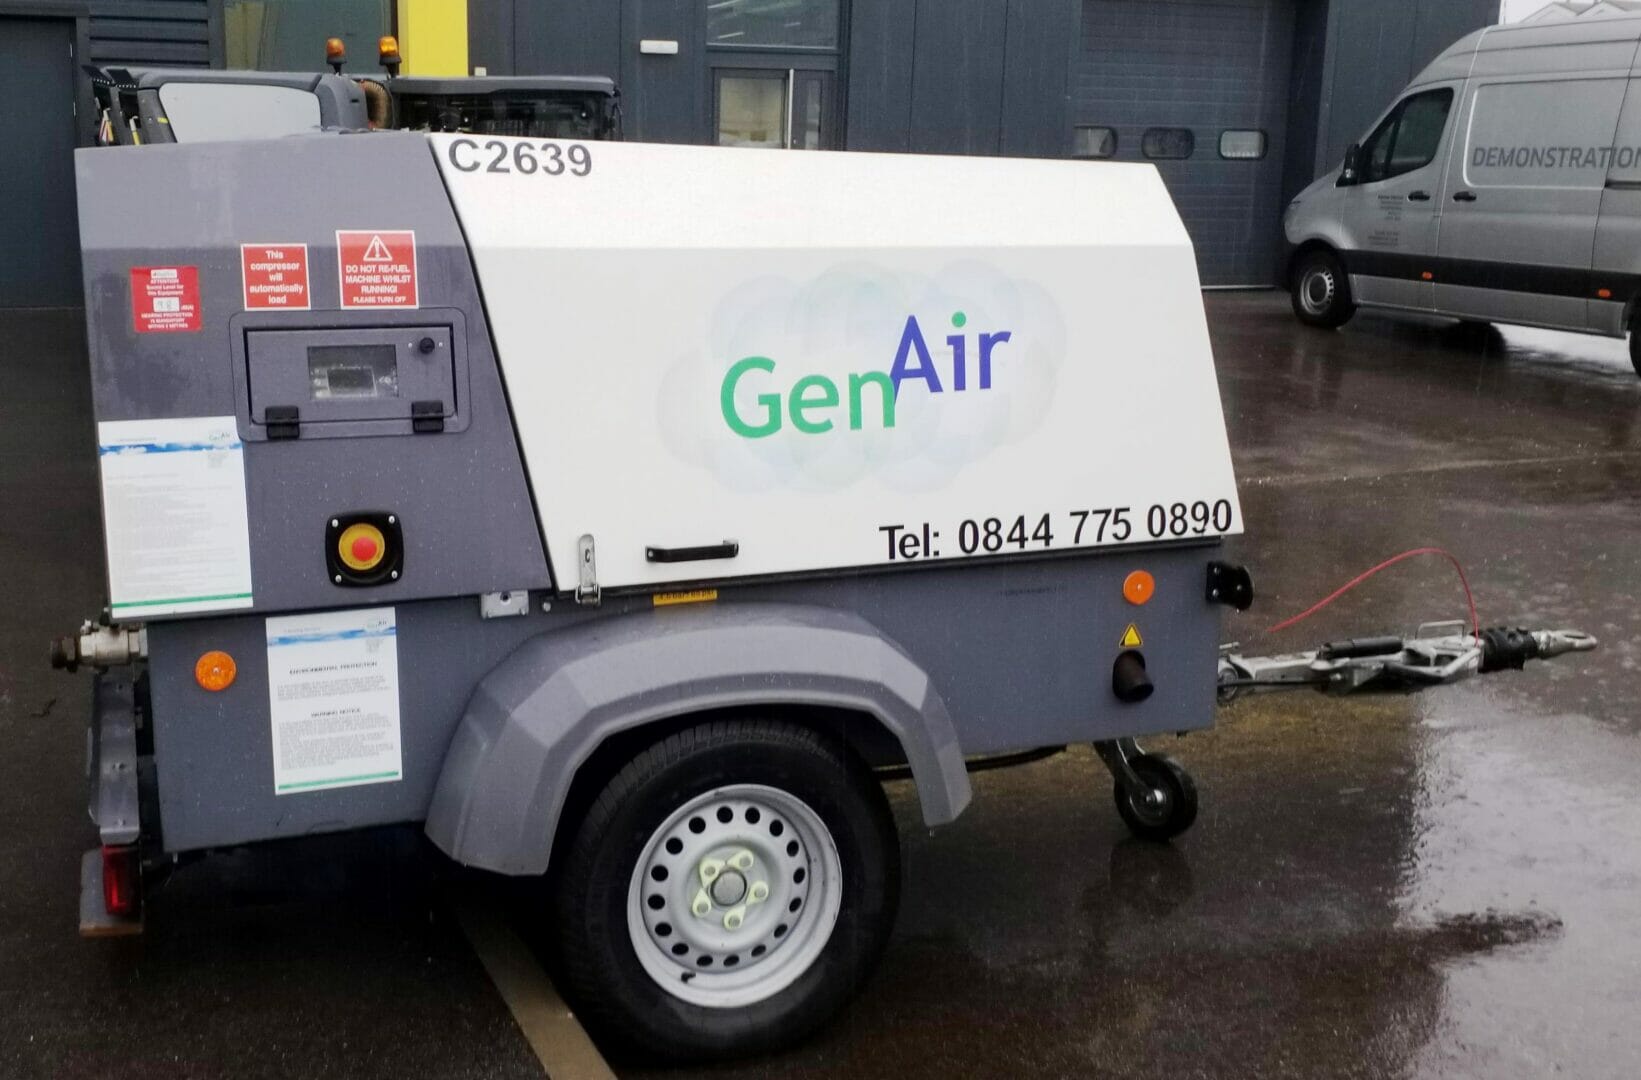 GenAir are set for a Green Apple Award for their All Weather All Electric Air Compressor